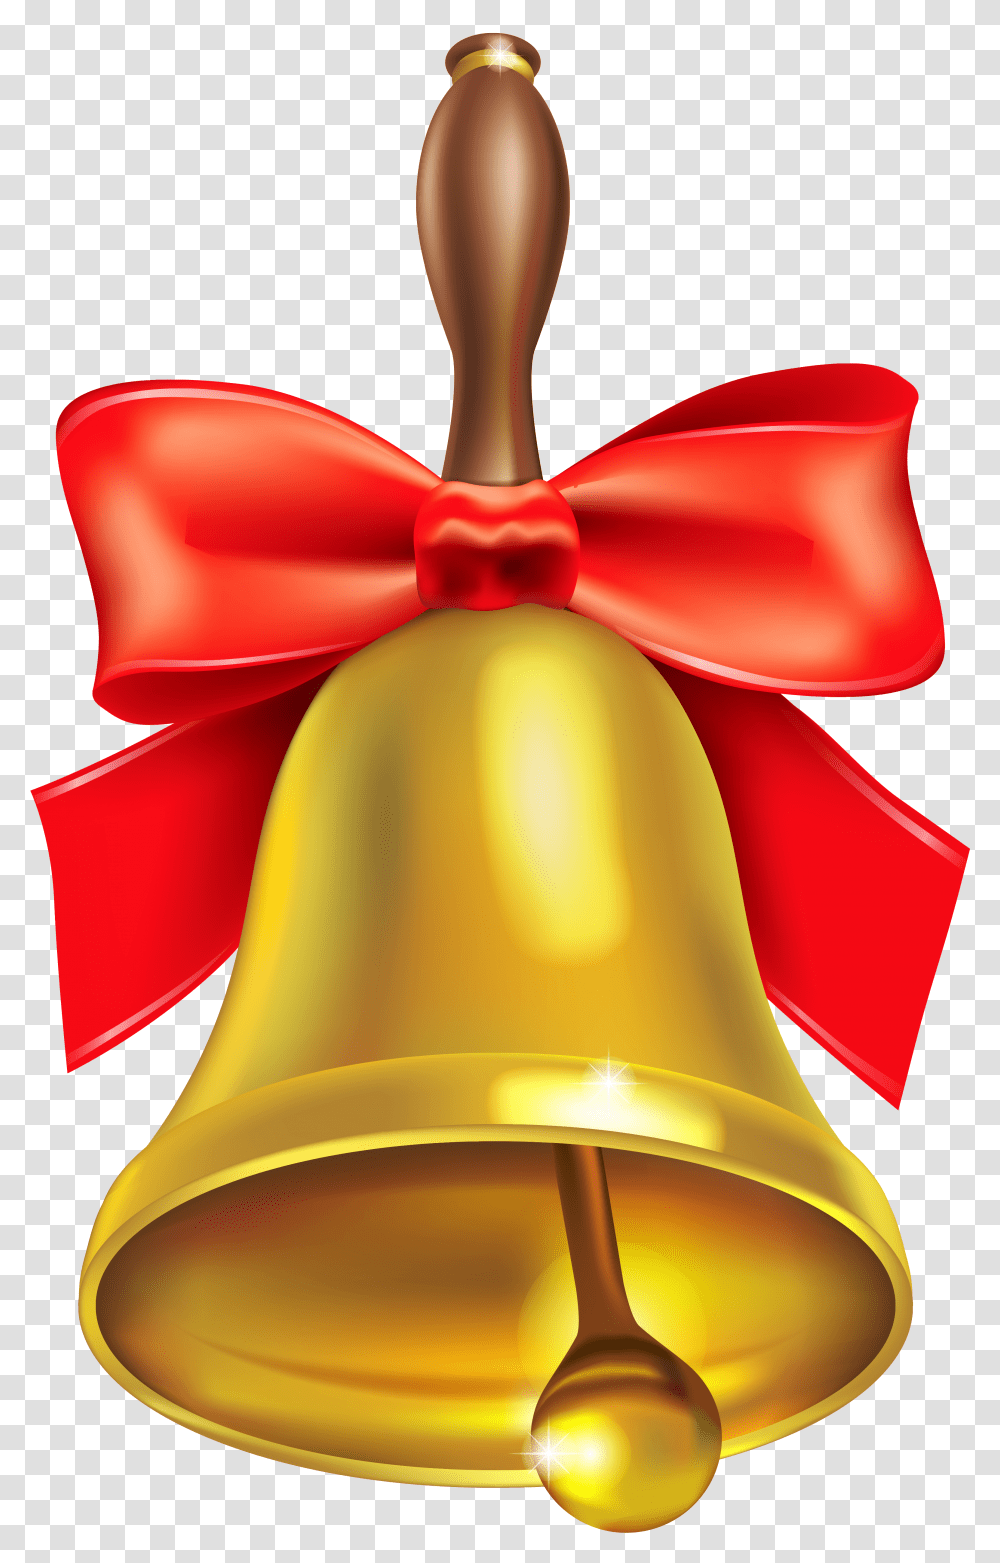 Golden Bell Image For Free Download Christmas Bell Clip Art, Lamp, Tie, Accessories, Accessory Transparent Png